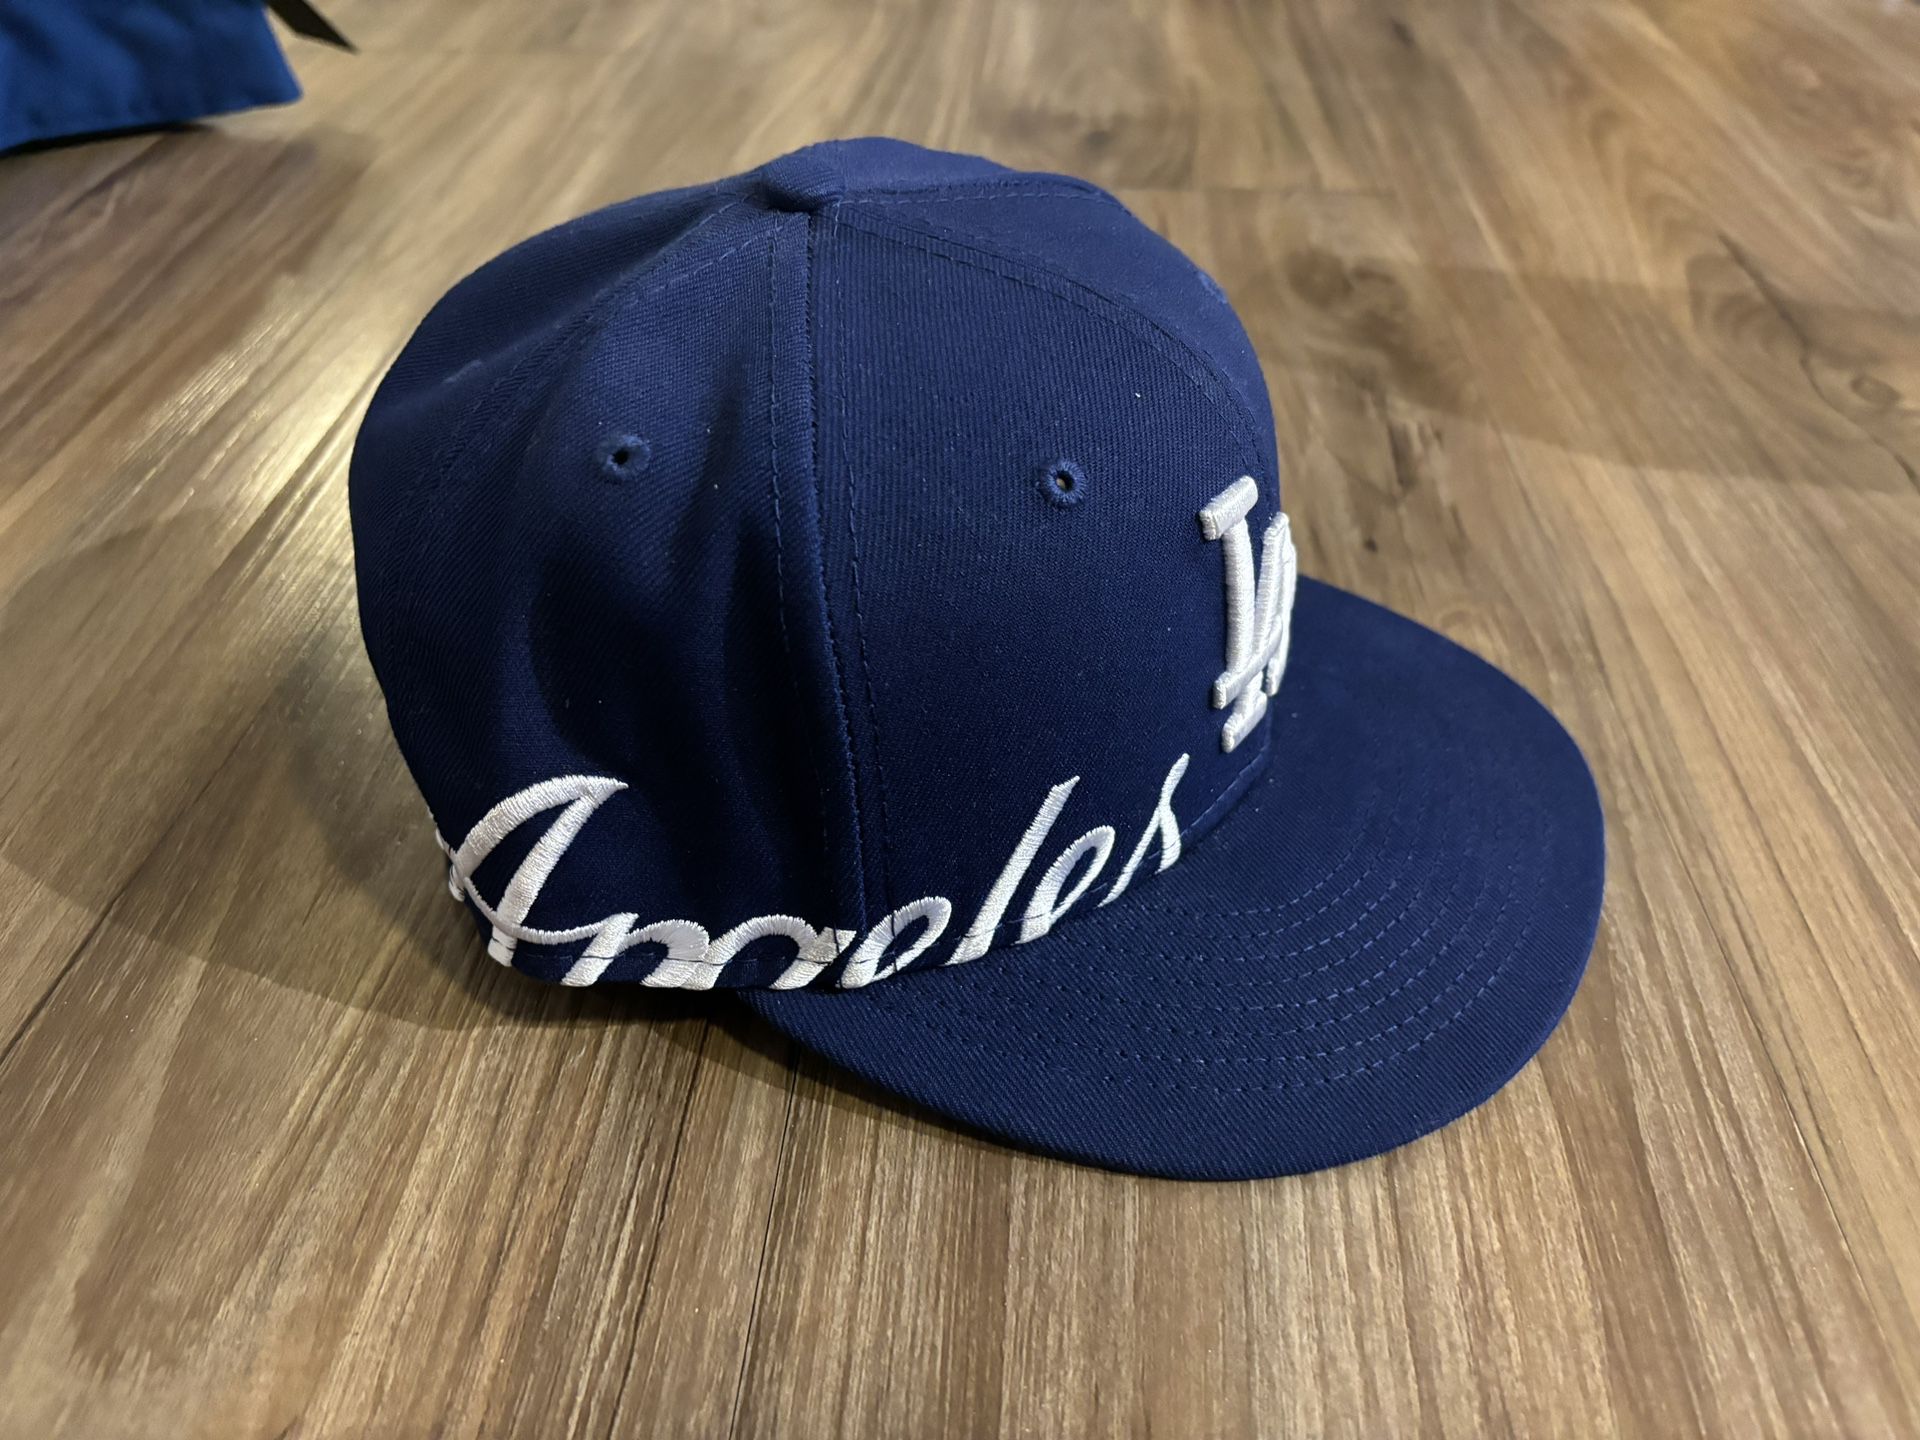 Los Angeles Dodgers New Era Fitted Hat Size 7 1/2 